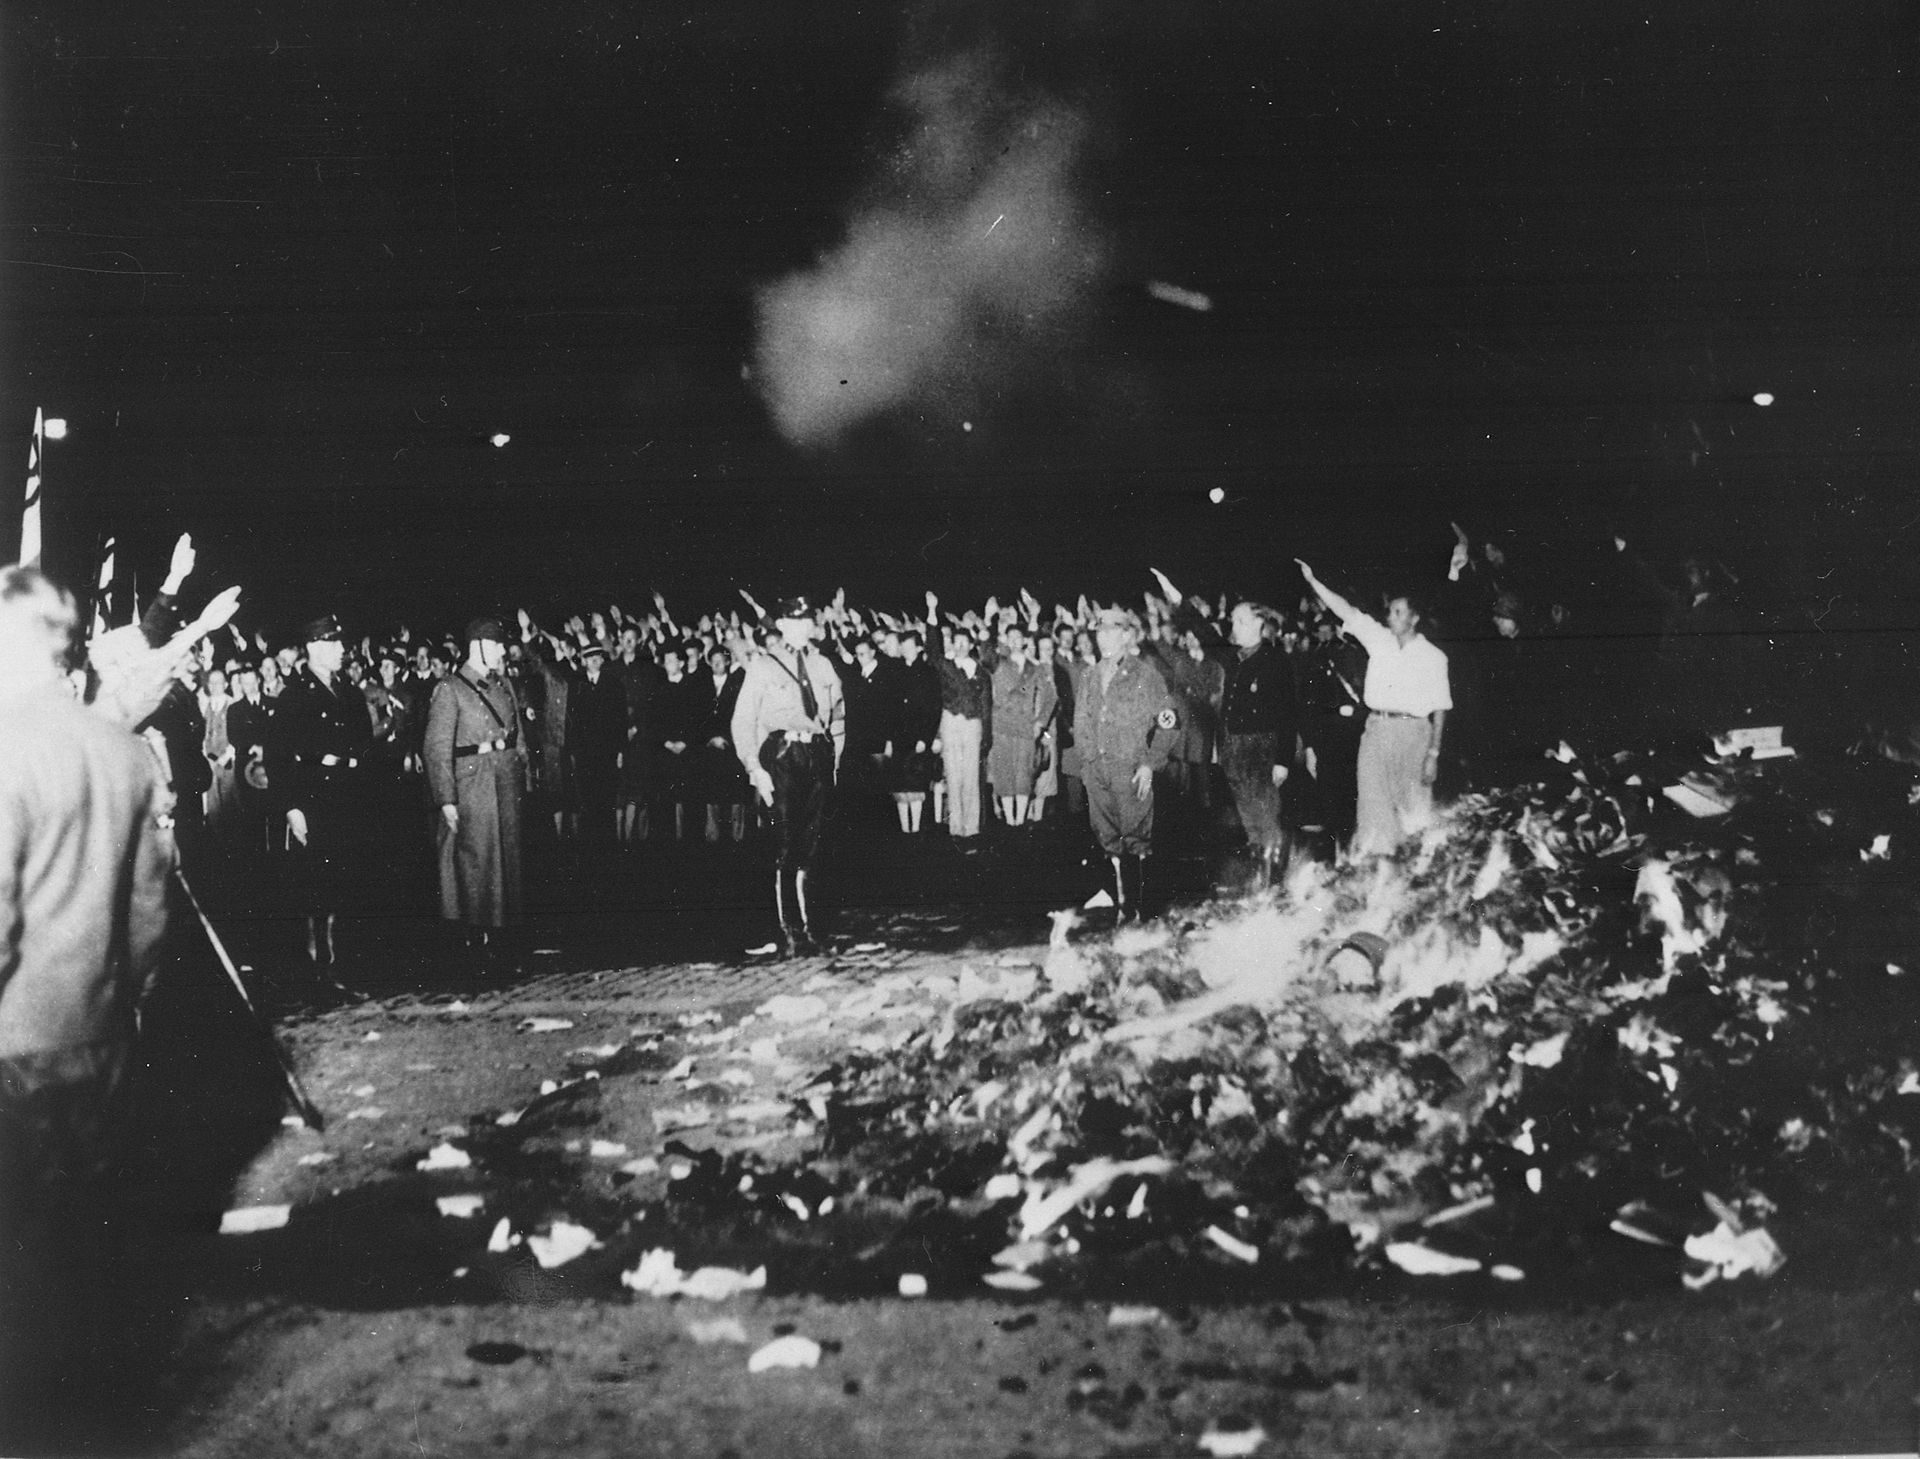 Thousands of books smoulder in a huge bonfire as Germans give the Nazi salute during the wave of book-burnings that spread throughout Germany.